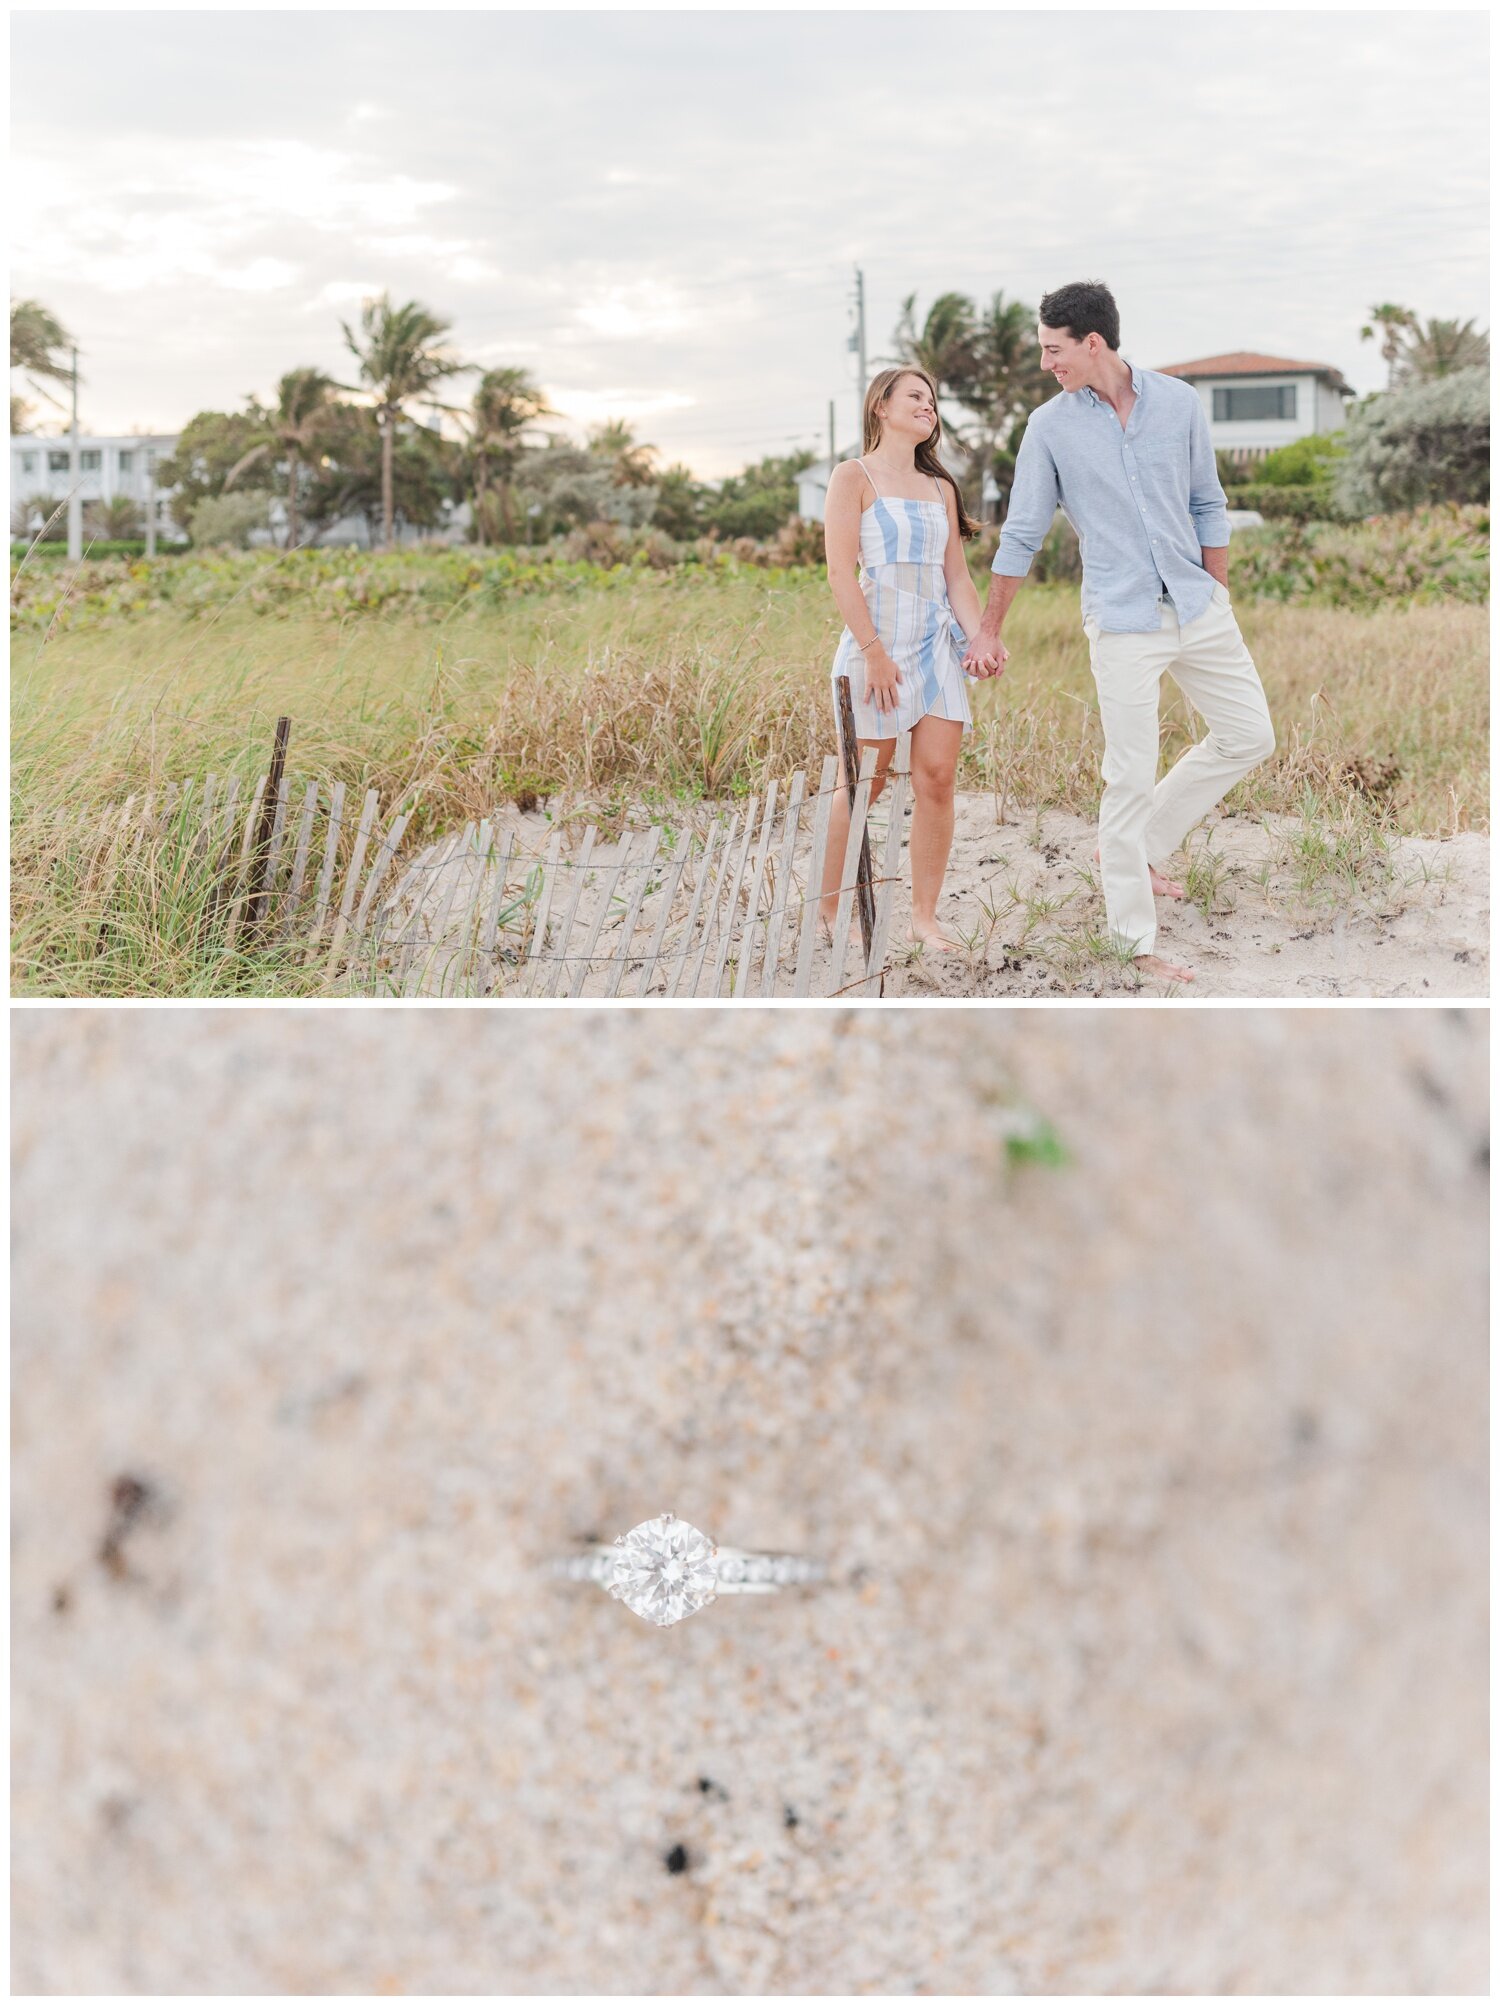 CMageePhotography_DelrayBeach_Engagement_2021_0006.jpg